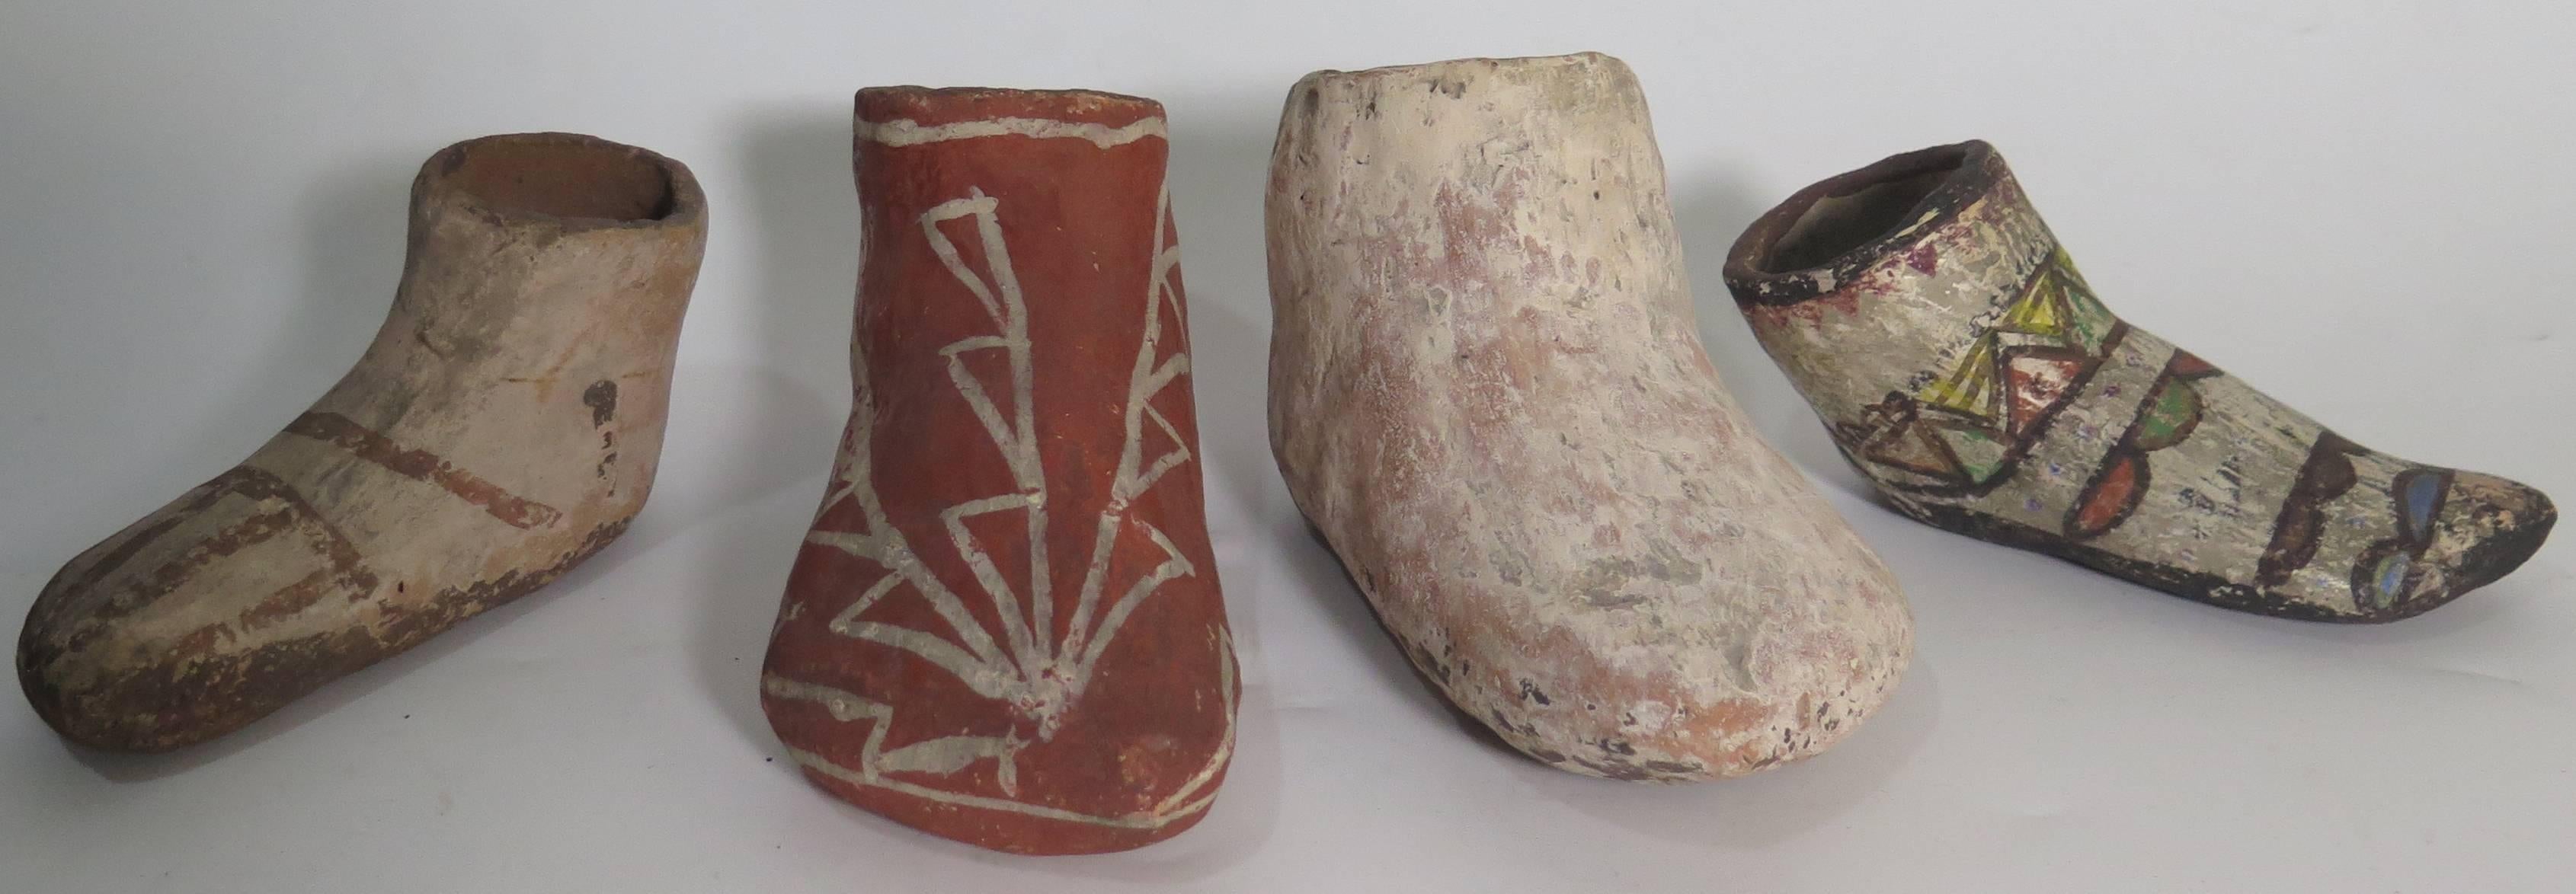 Excellent group of early pottery moccasins.